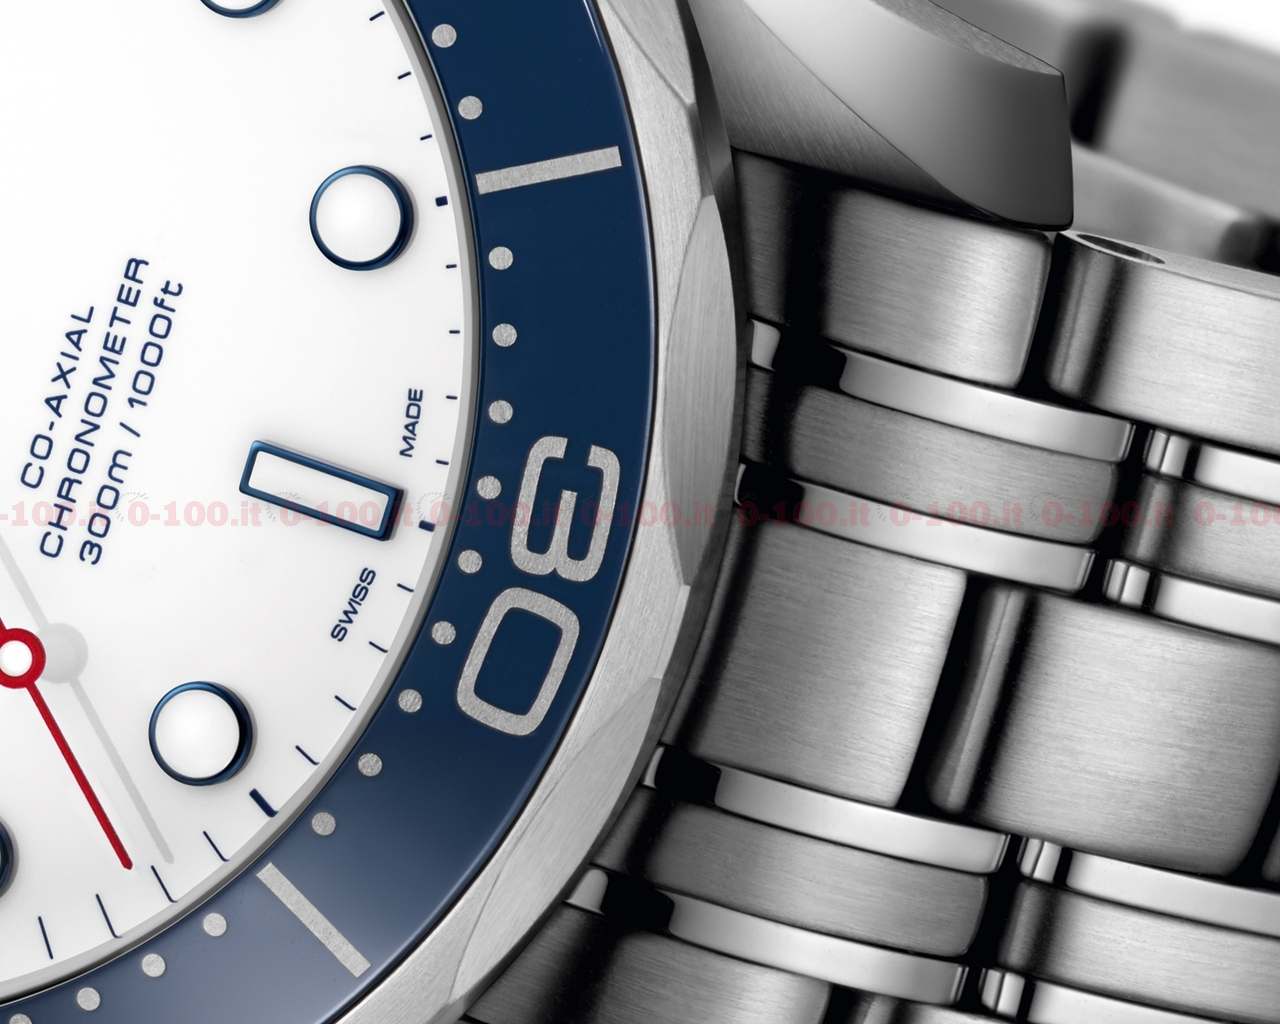 Omega Seamaster Diver 300M “Commander’s Watch” Limited Edition_0-1008